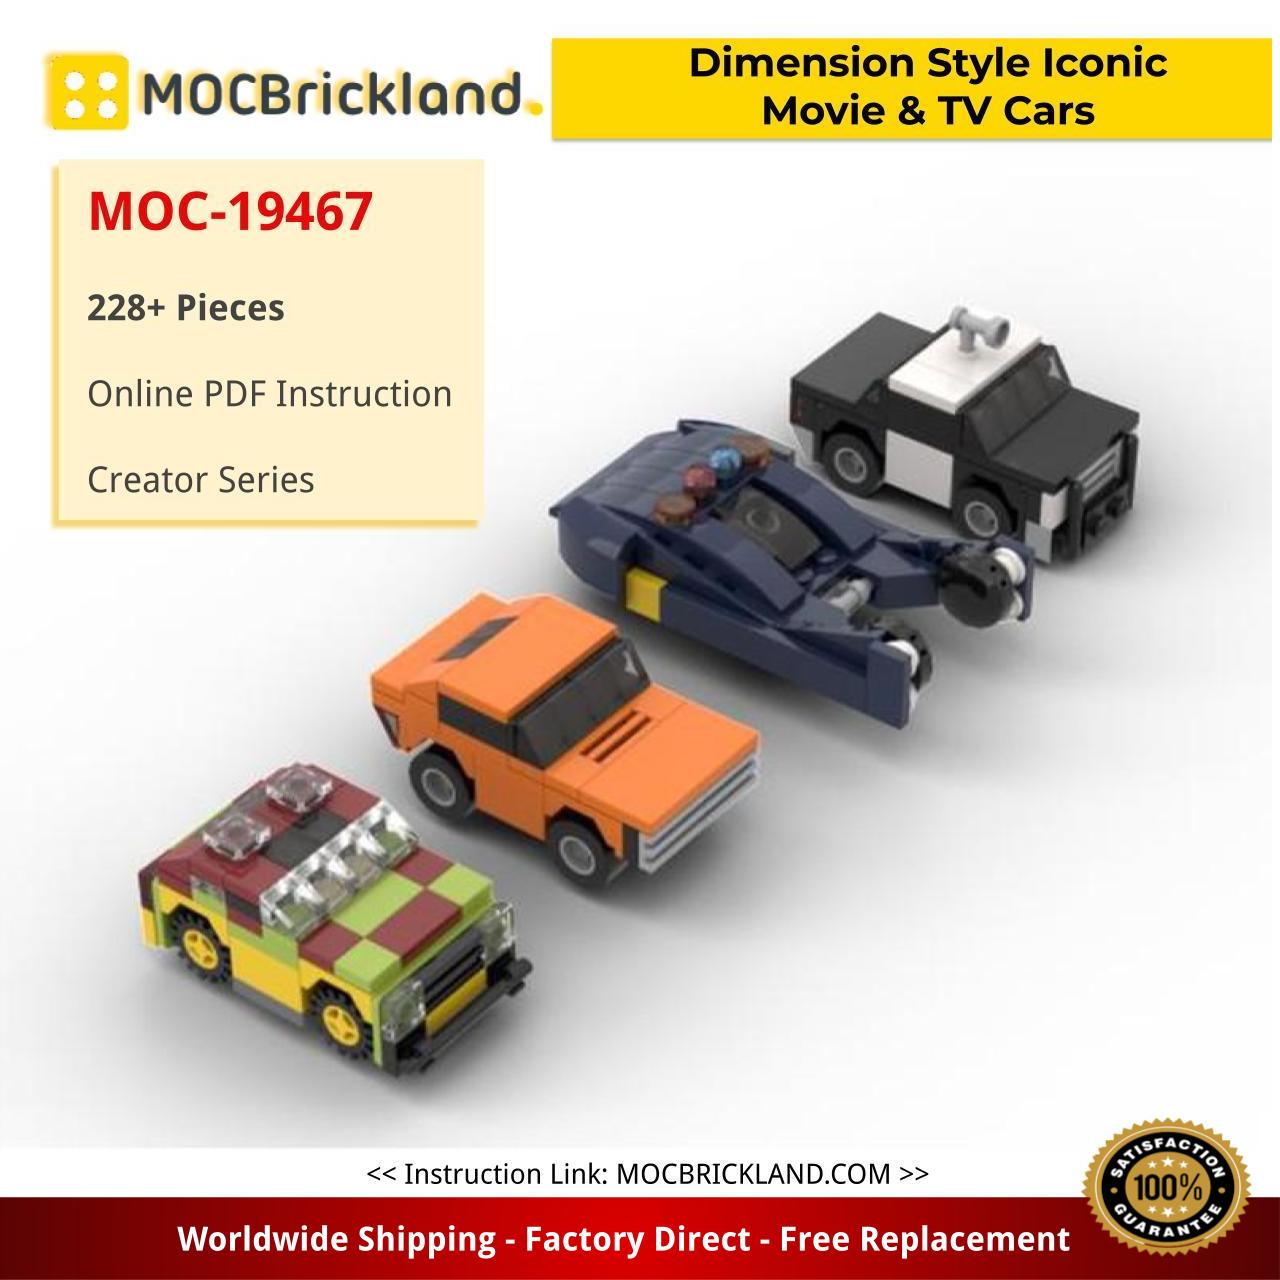 MOCBRICKLAND MOC-19467 Dimension Style Iconic Movie and TV Cars